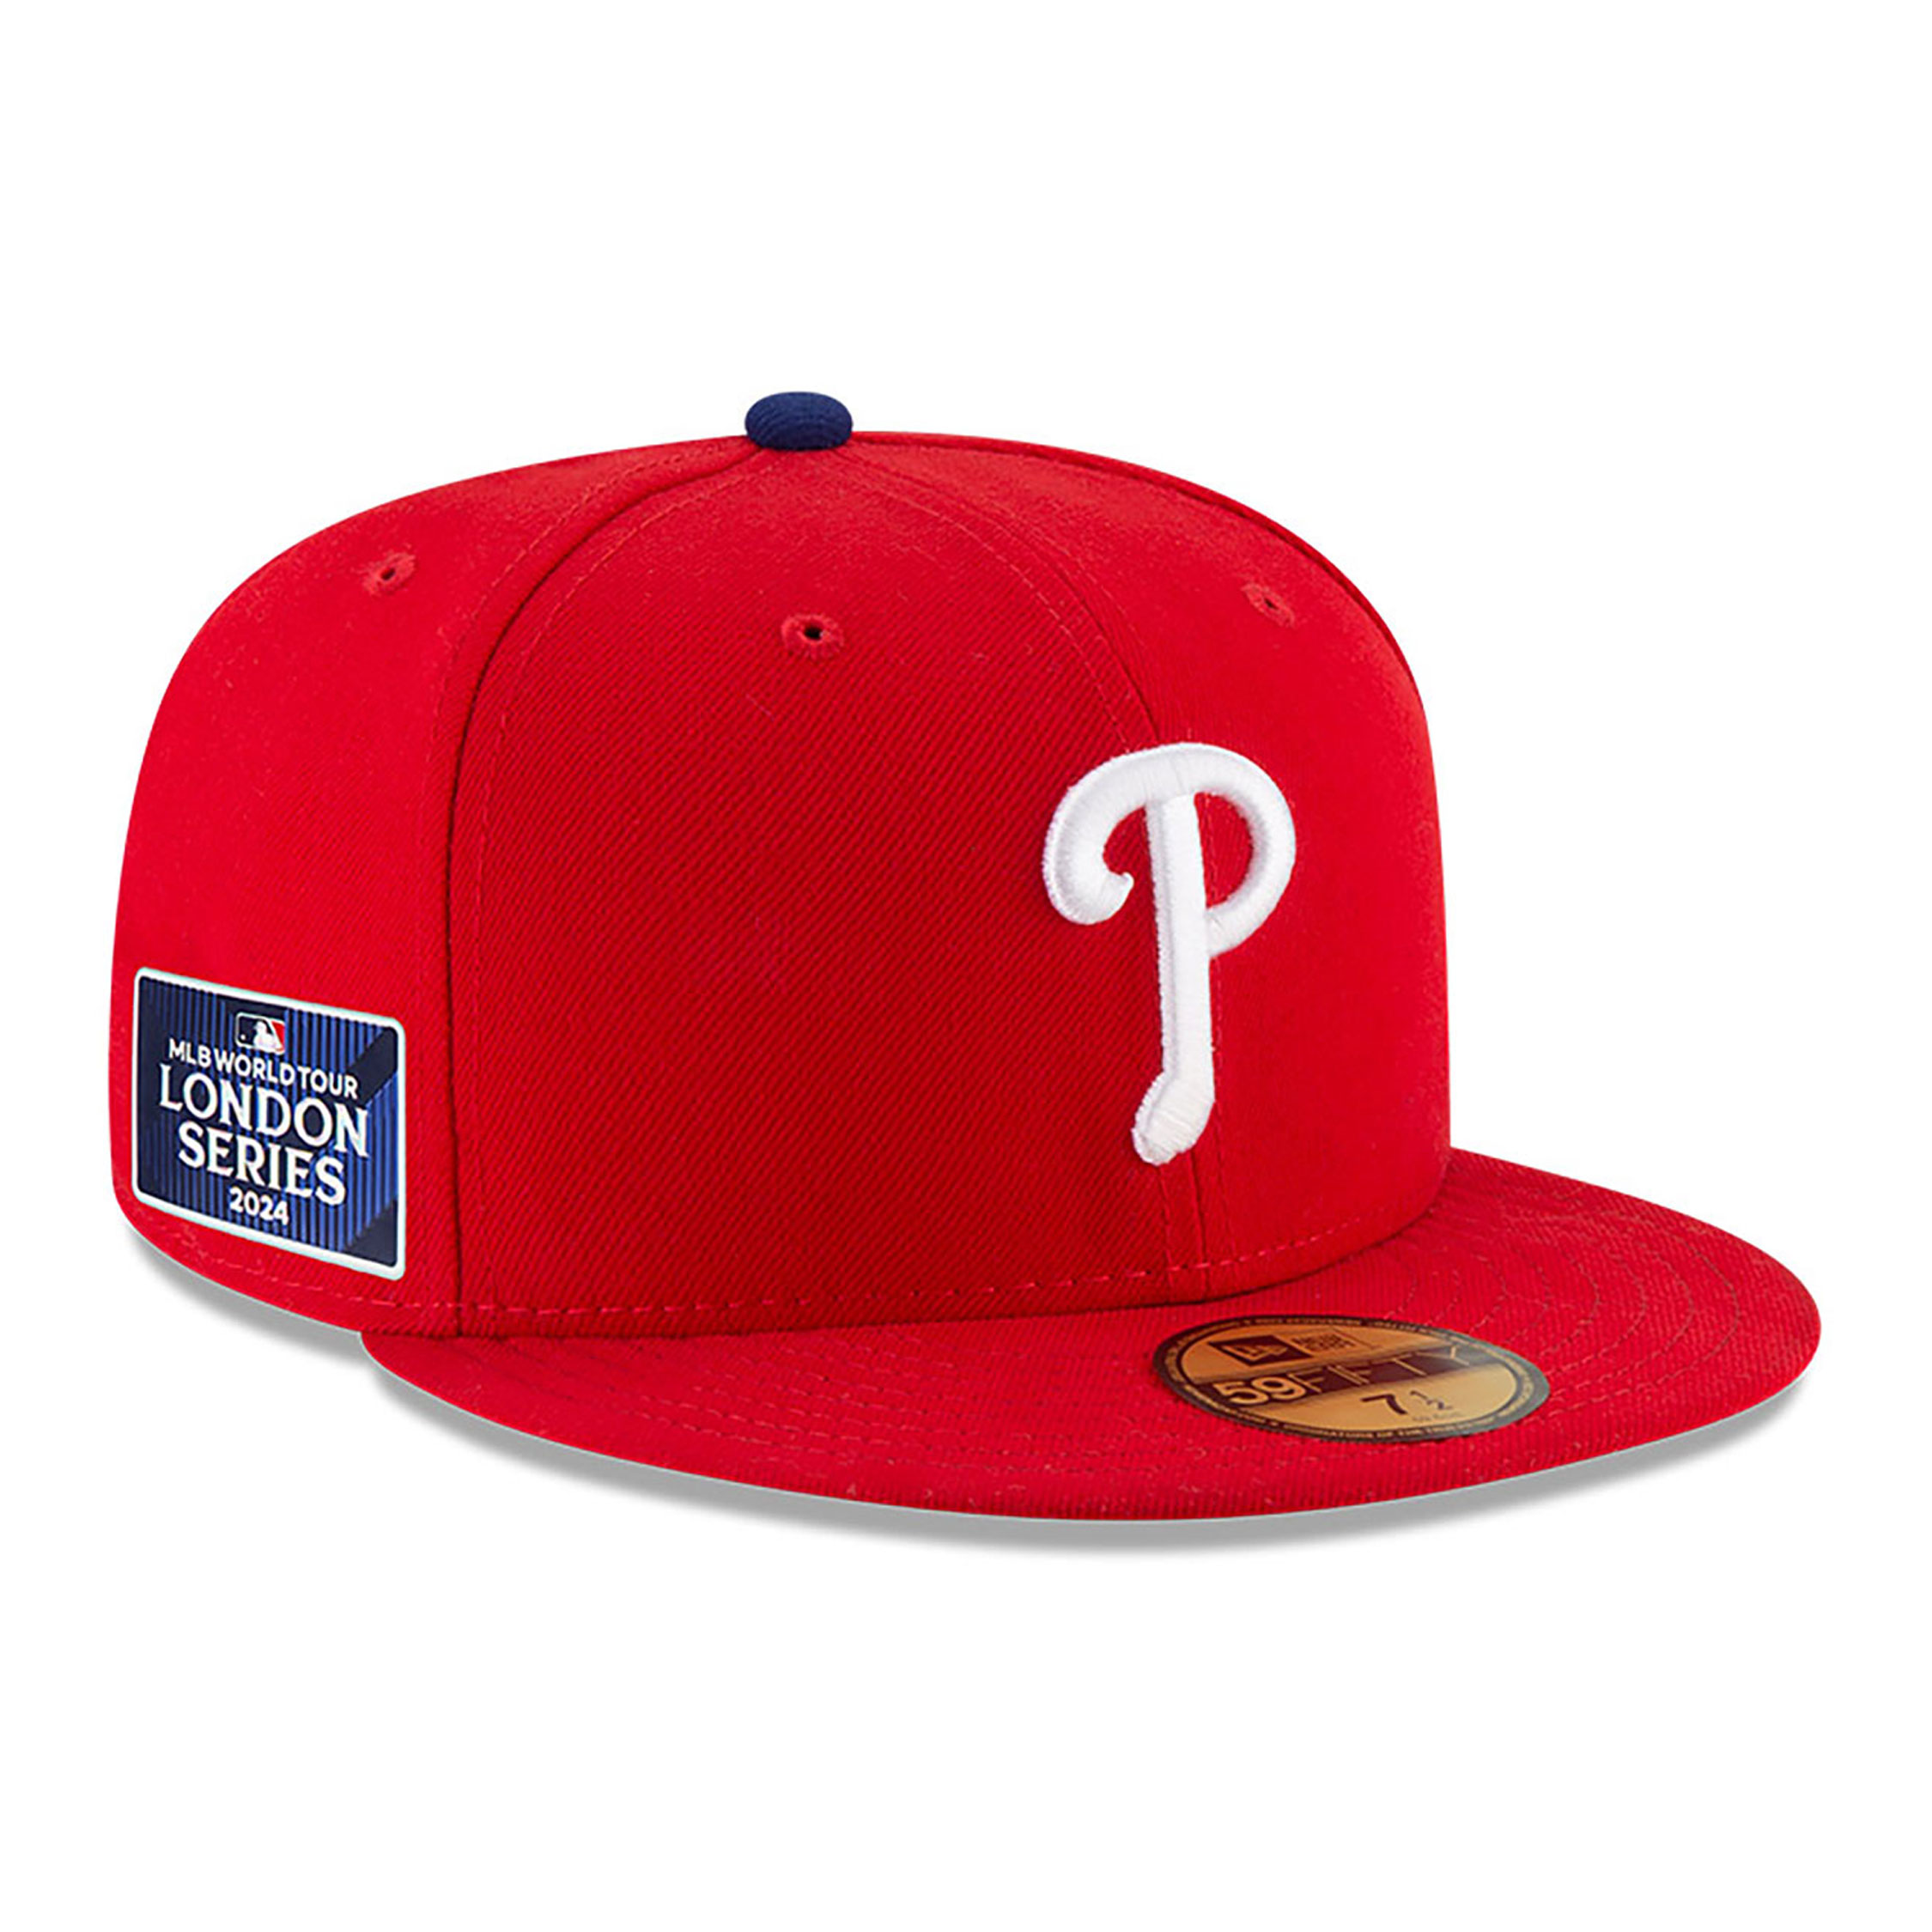 Philadelphia Phillies MLB London Series 2024 Red 59FIFTY Fitted Cap